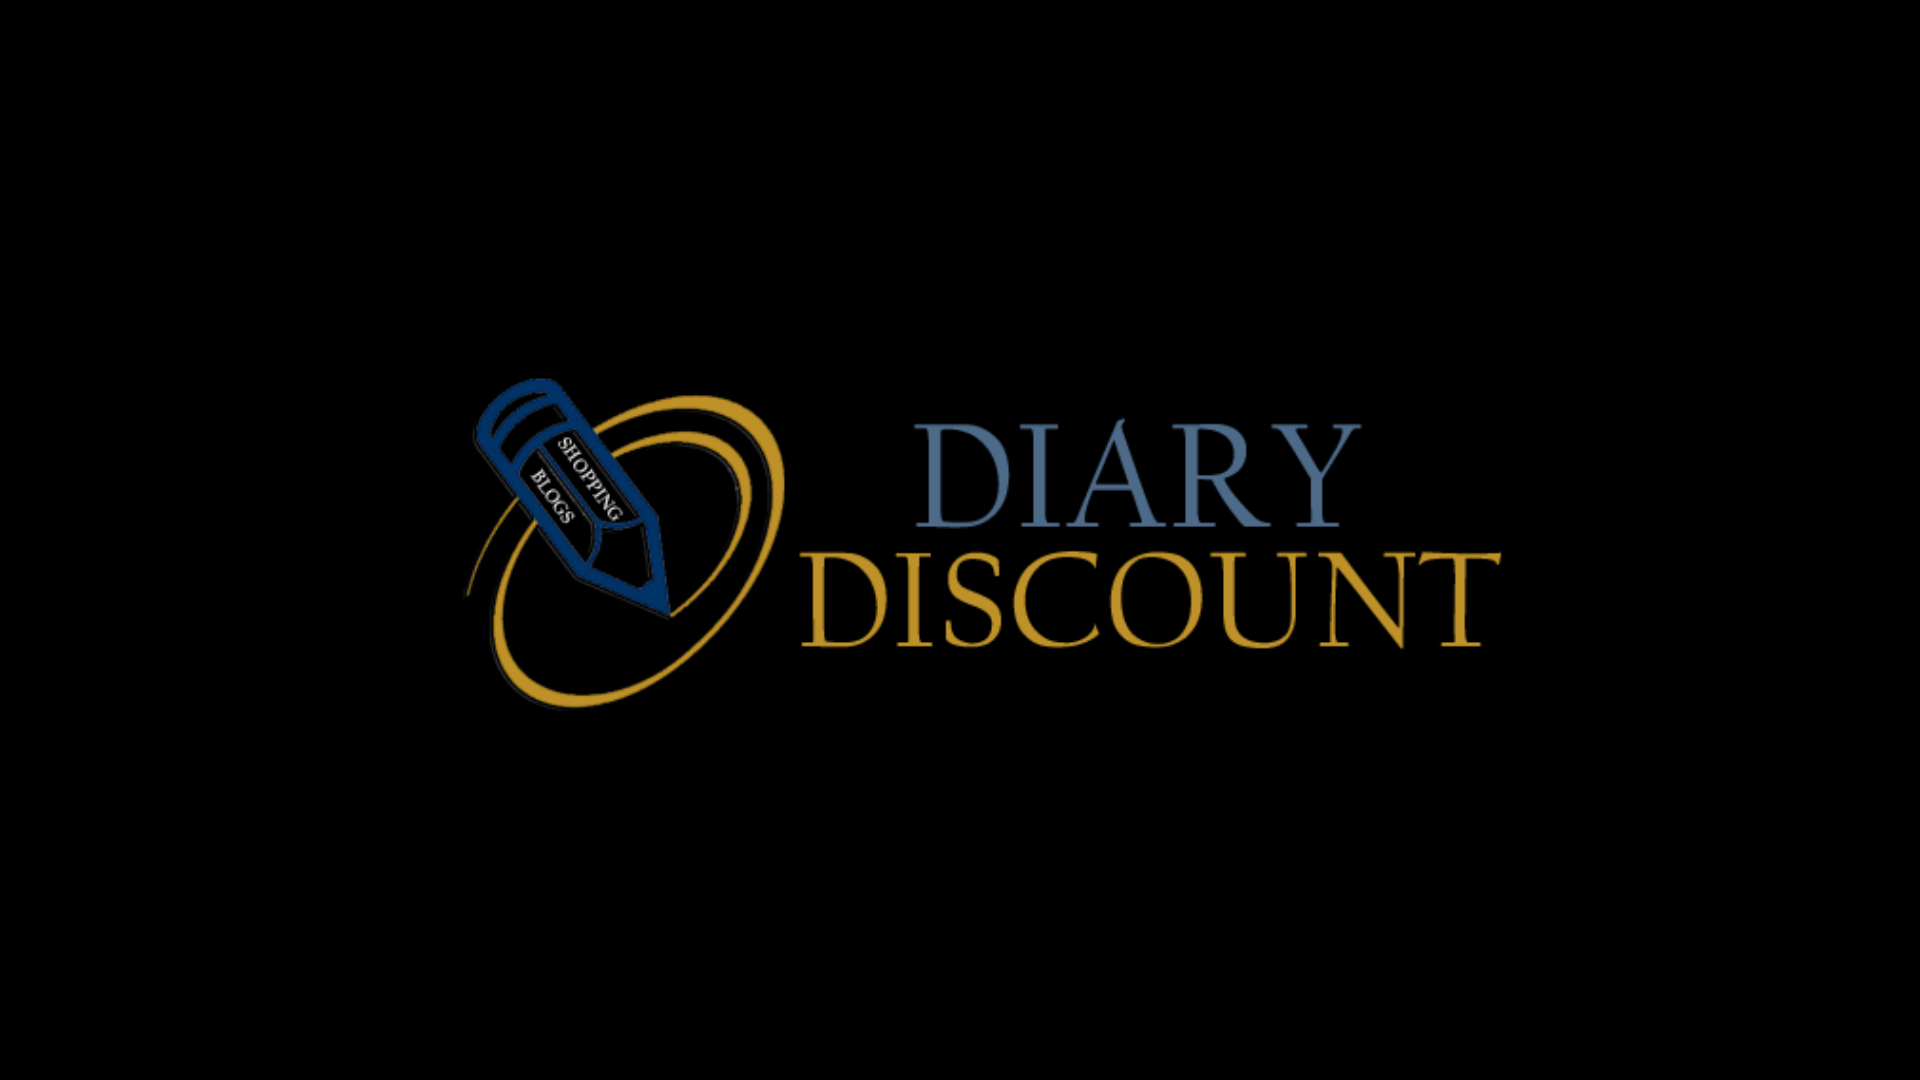 How to Find & Use Diary Discounts for Maximum Savings